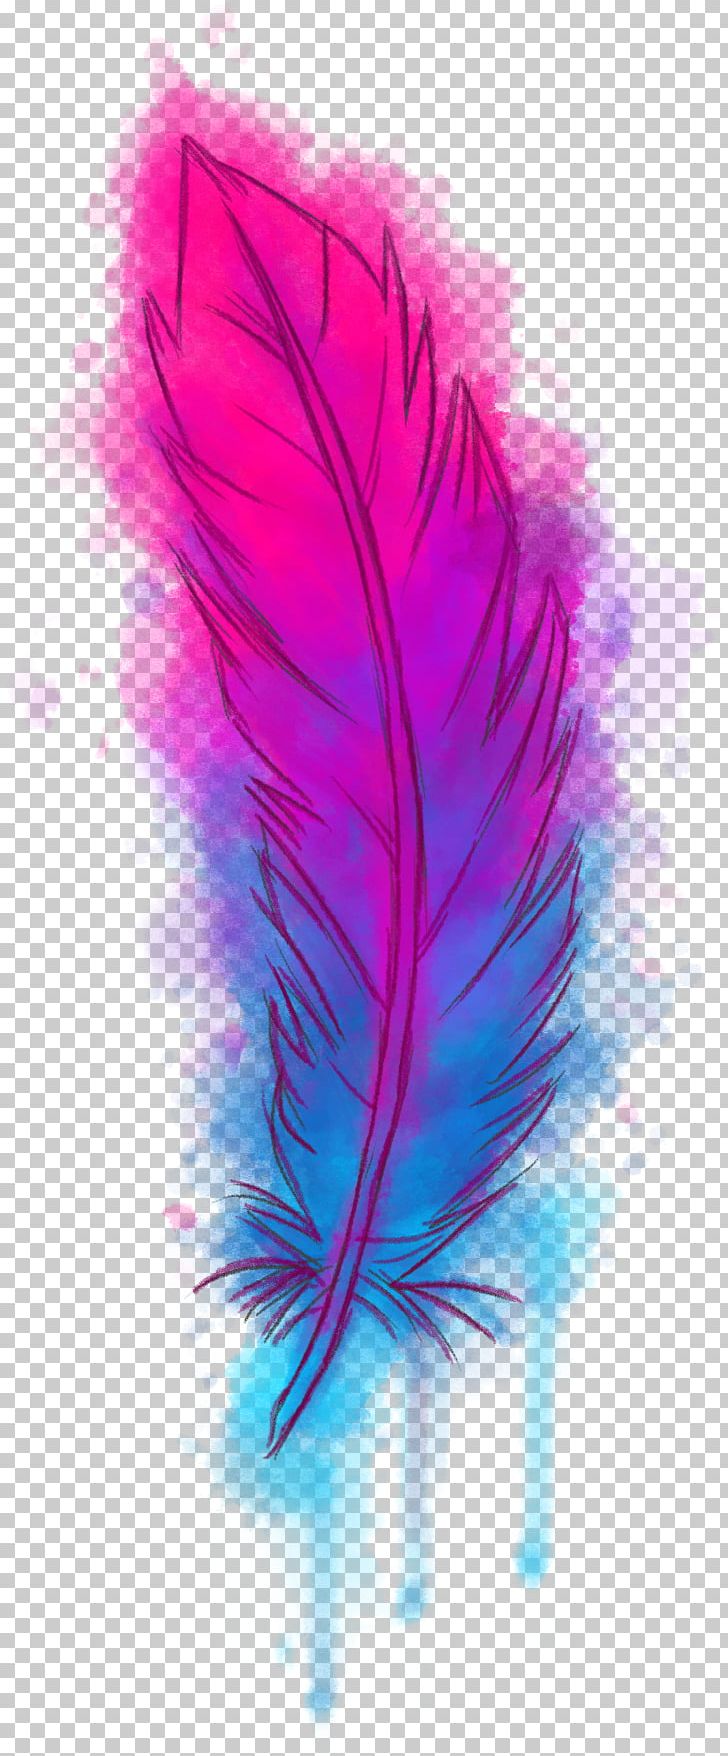 Feather Drawing Sticker Watercolor Painting PNG, Clipart, Art, Deviantart, Drawing, Feather, Magenta Free PNG Download